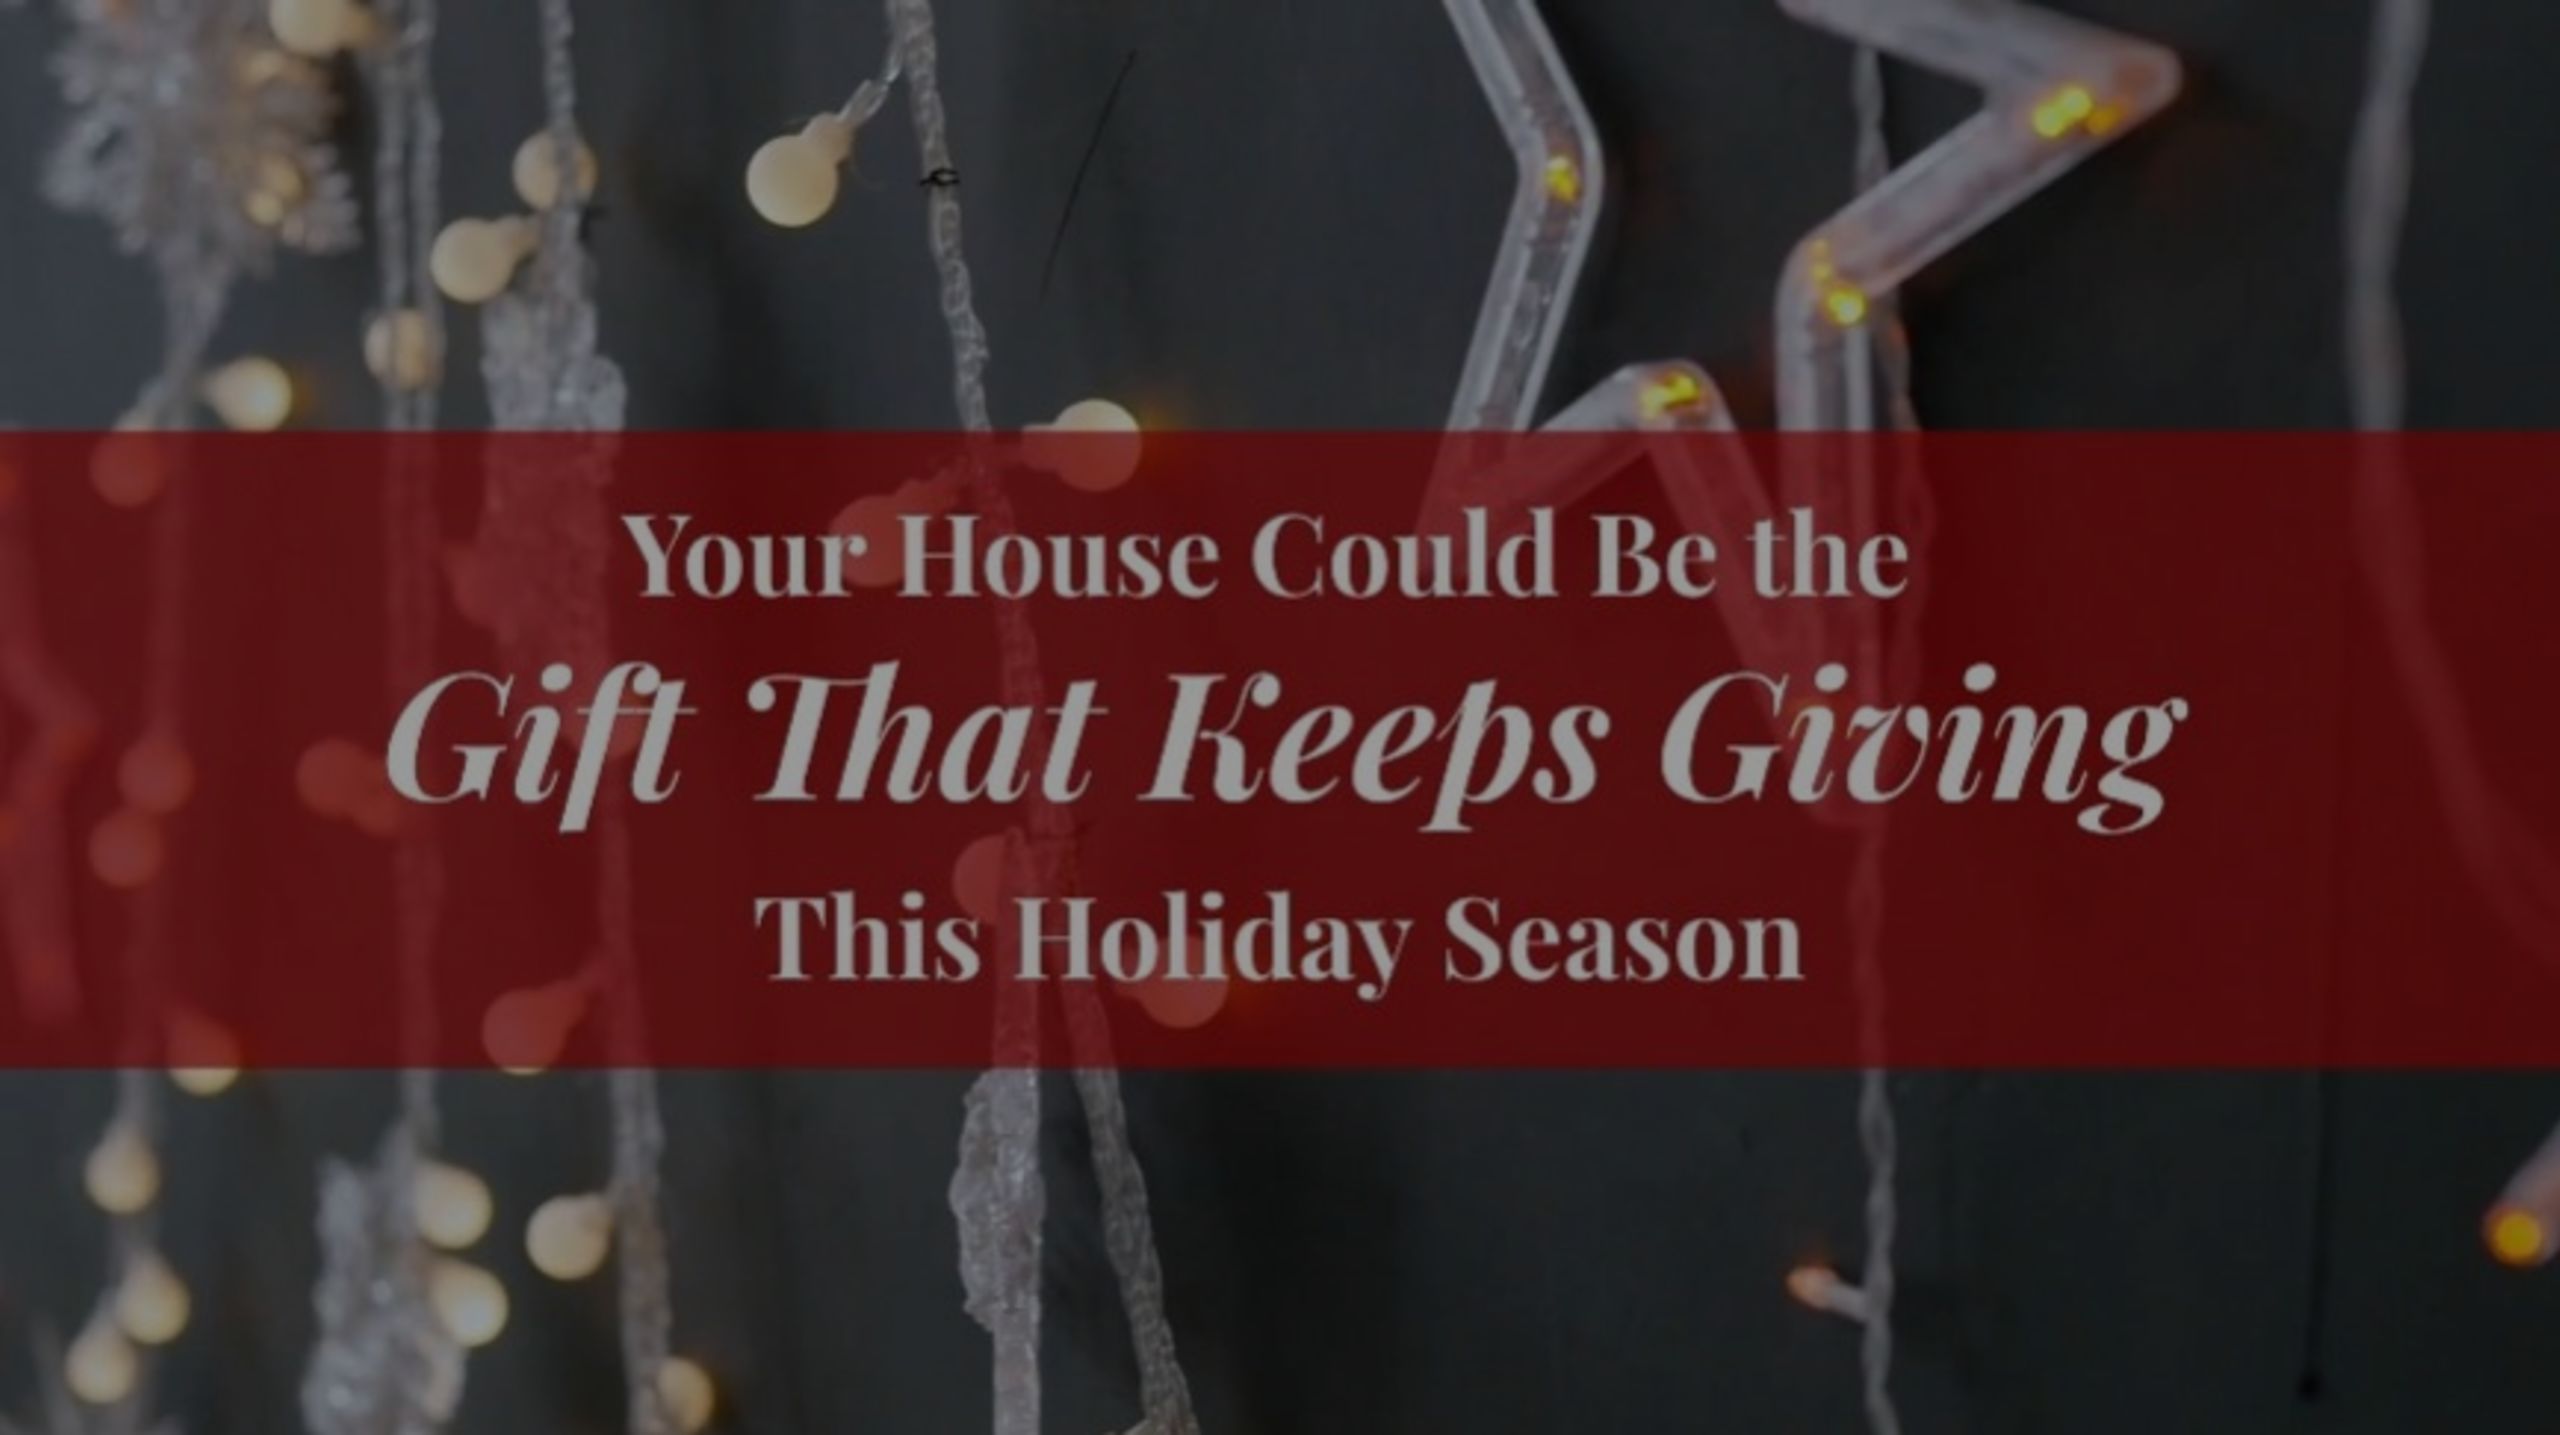 Your House Could Be the Gift That Keeps Giving This Holiday Season